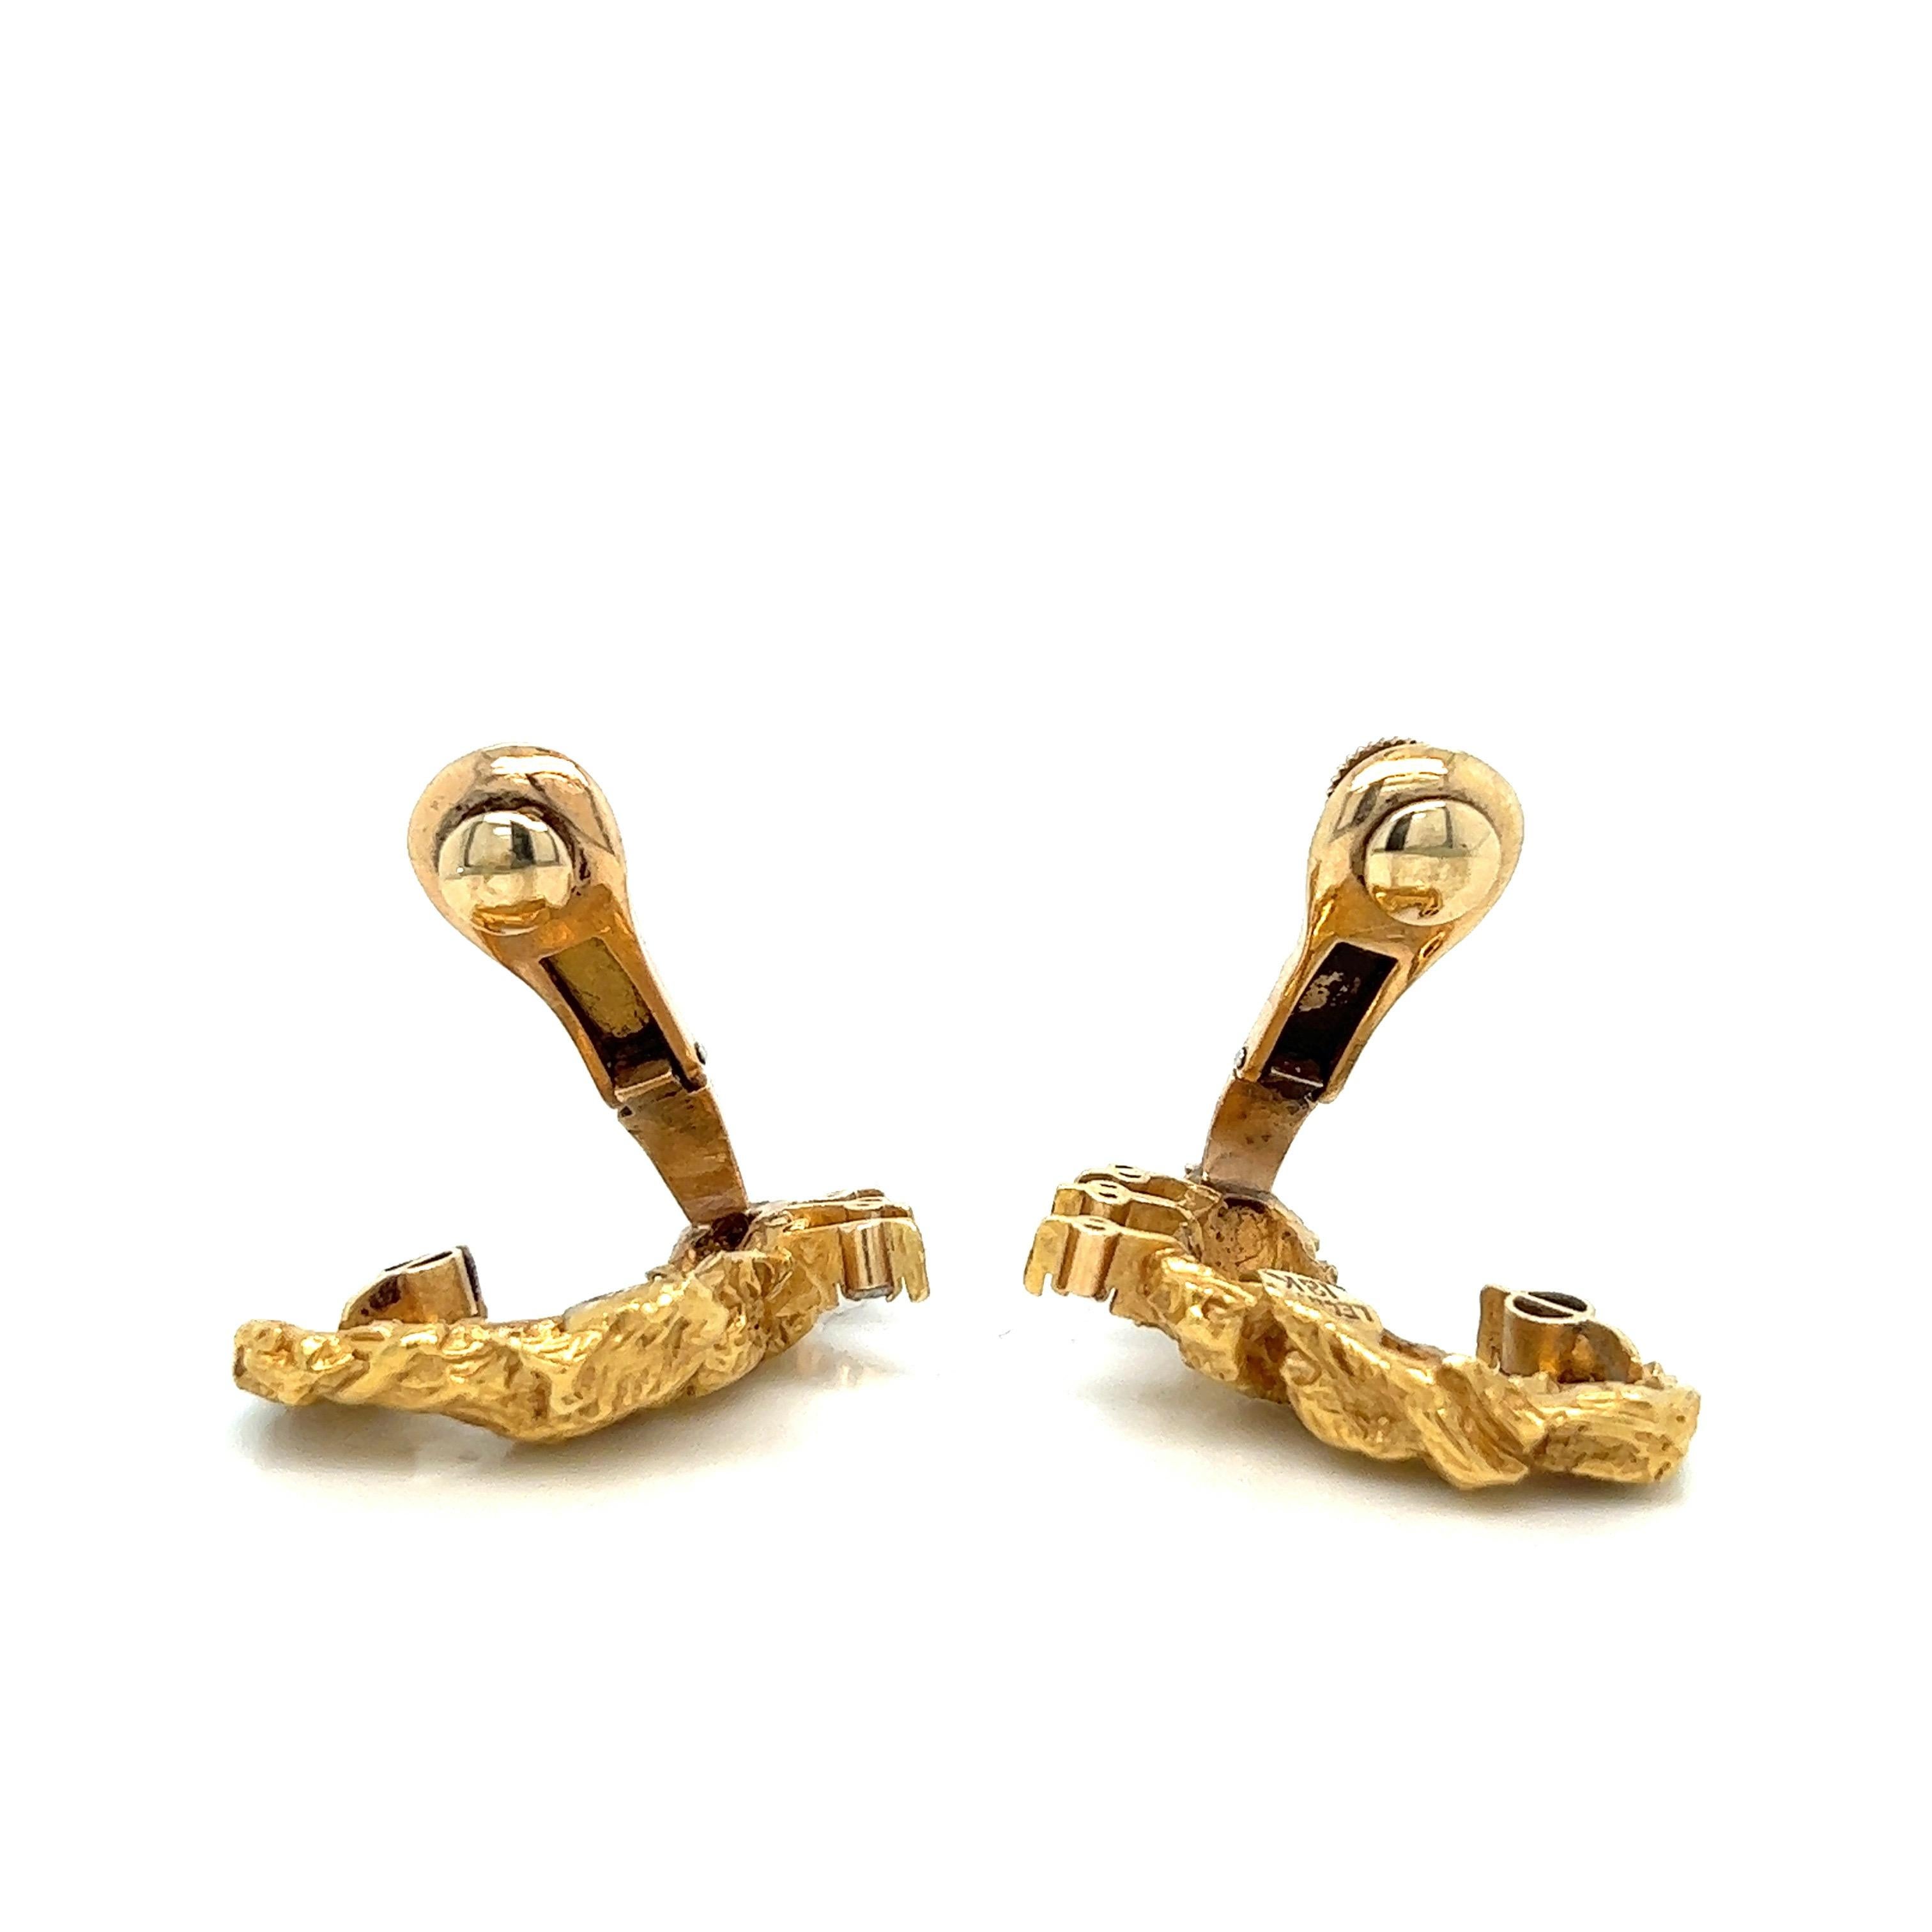 Stanley Lechtzin Gold Ruby Diamond Ear Clips In Good Condition For Sale In New York, NY